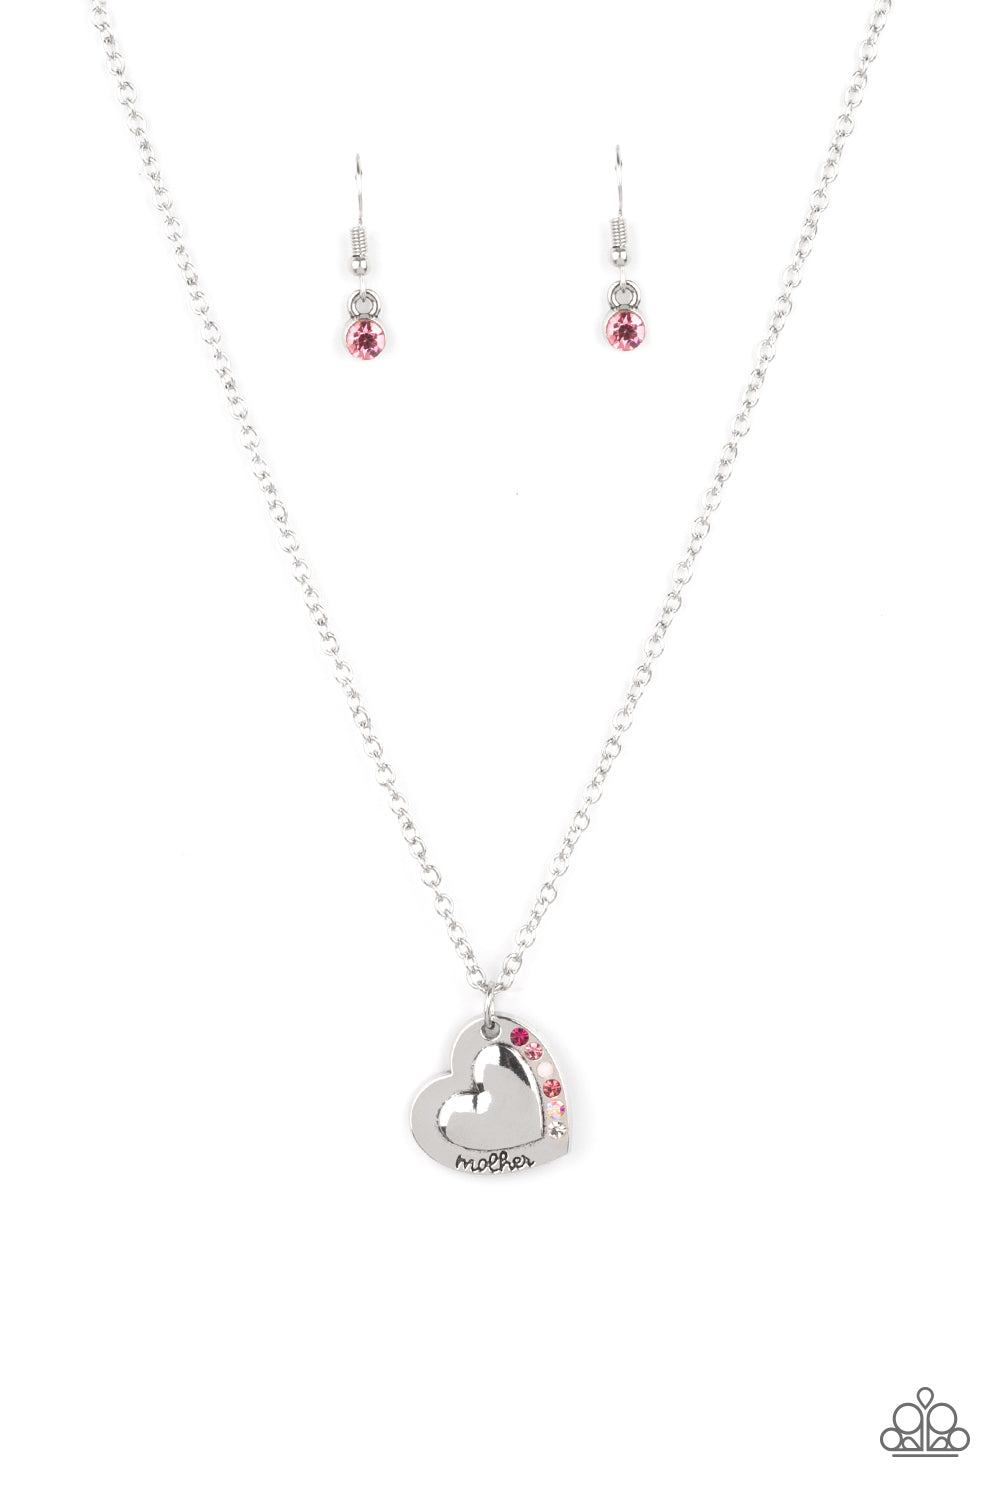 Happily Heartwarming - Pink and Silver Heart Mother Necklace - Paparazzi Accessories - Stamped in the word, "Mother," an embossed heart pendant is encrusted in a row of pink, white, and iridescent rhinestones, creating a sparkly sentimental centerpiece below the collar. Features an adjustable clasp closure.